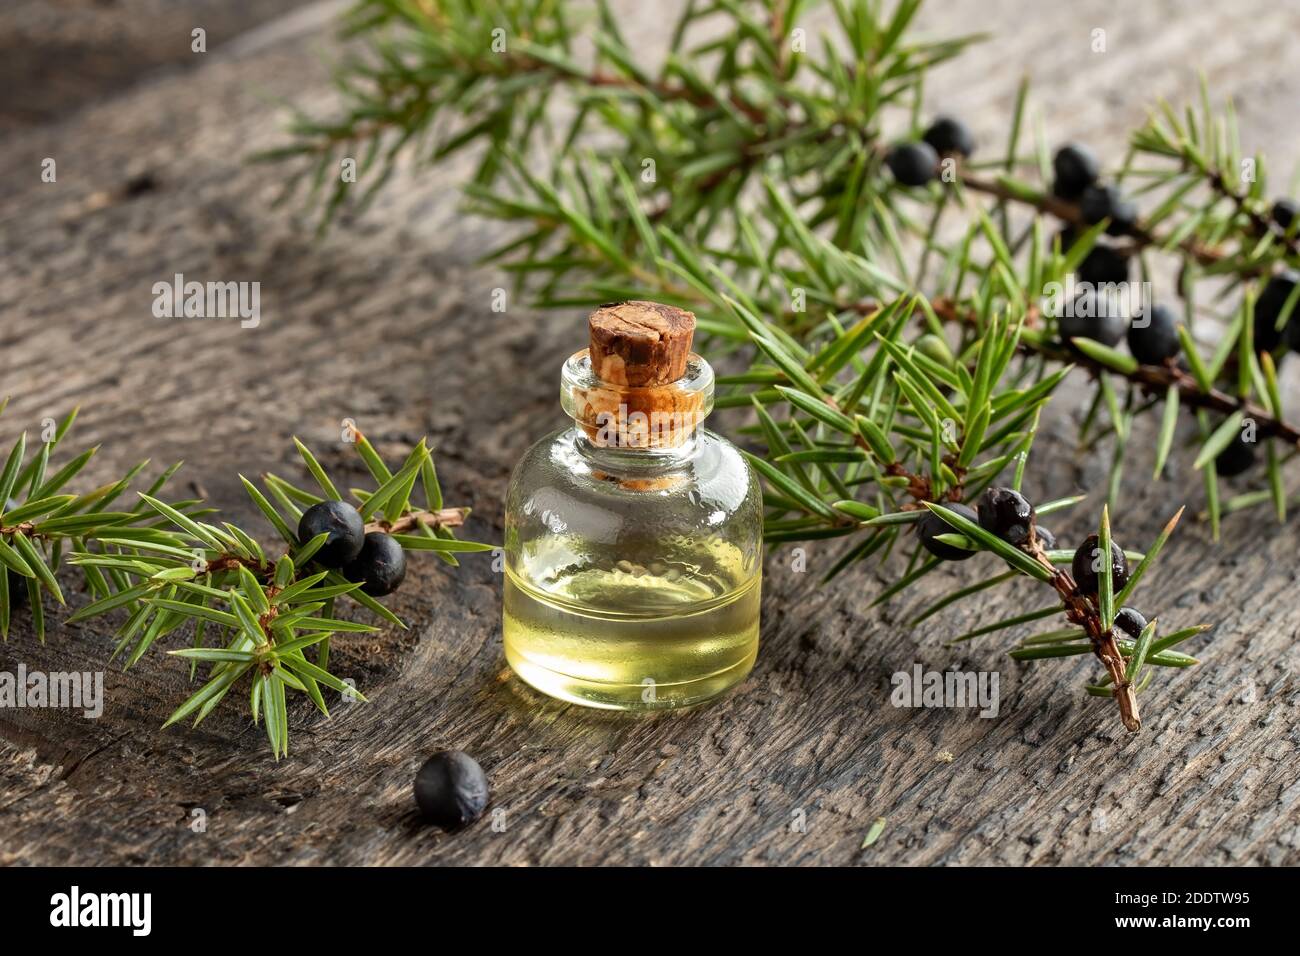 A bottle of essential oil with fresh juniper twigs on a table Stock Photo